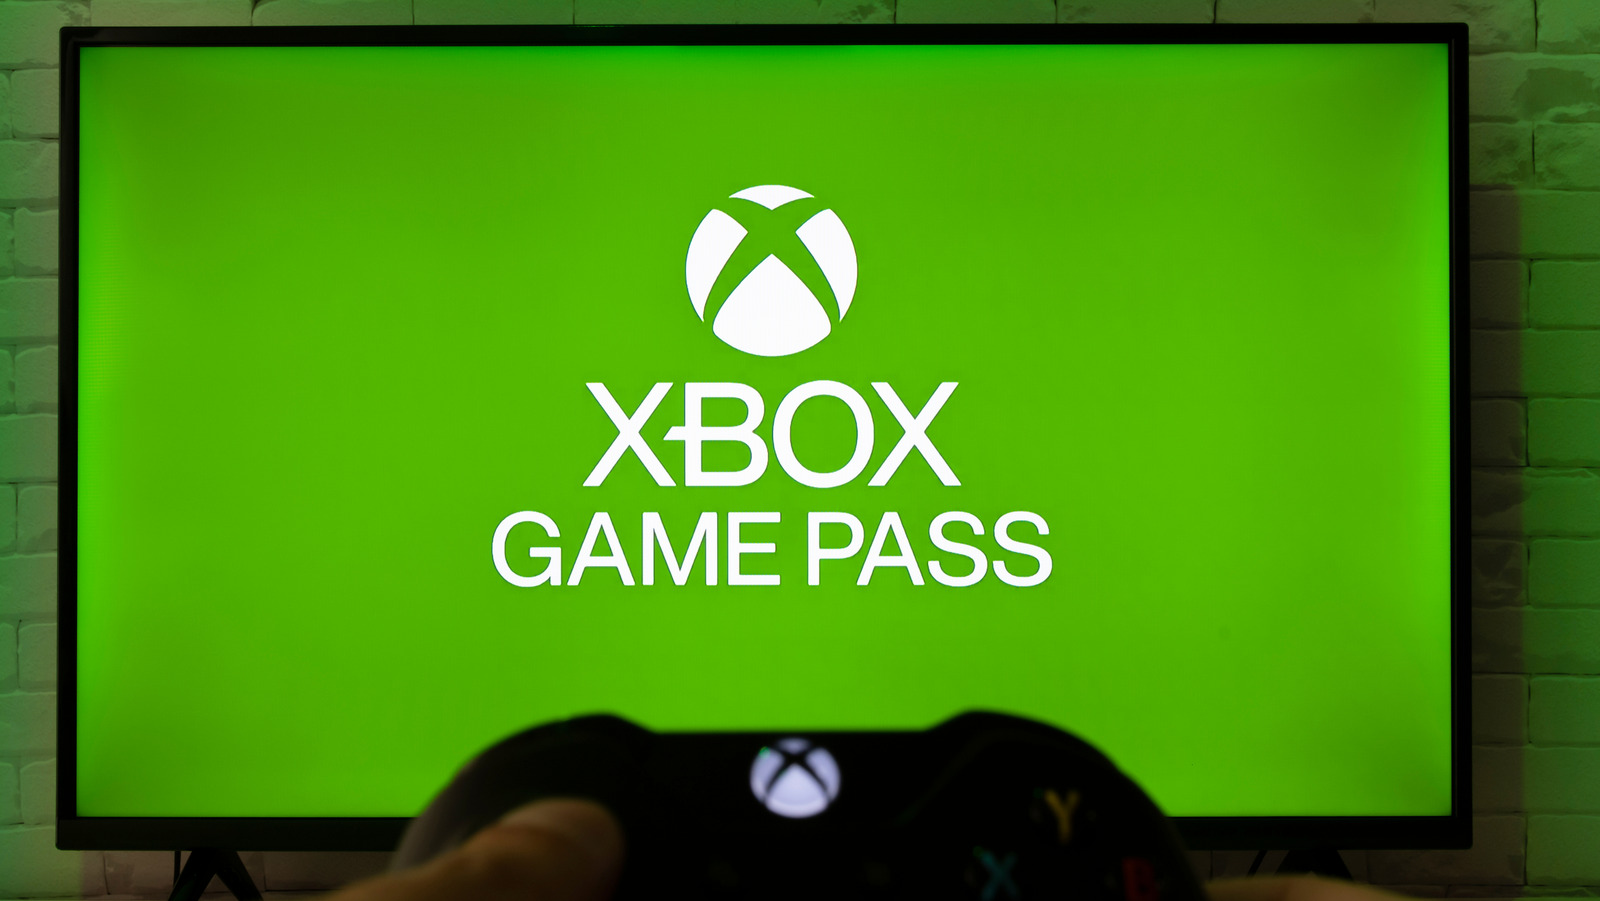 Microsoft Rewards Offers No Redeemable Xbox Game Pass Ultimate